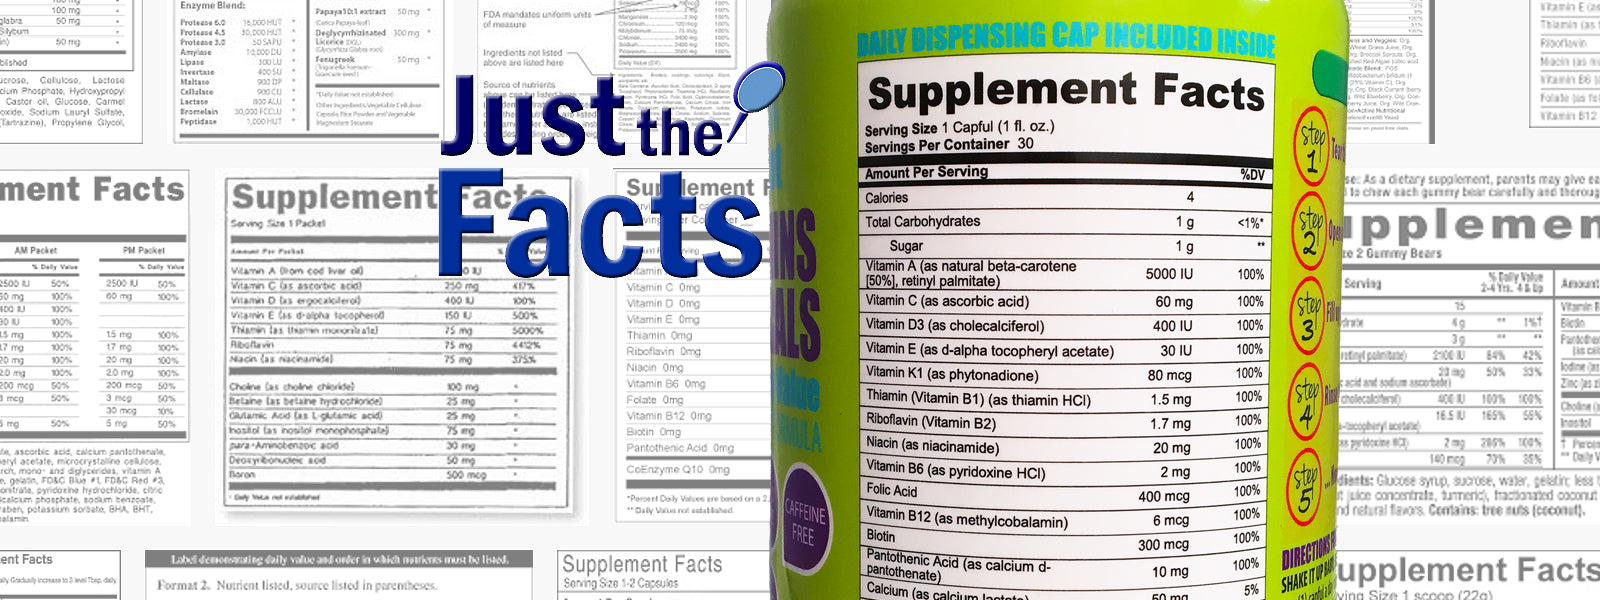 Supplement Facts Panel for BUICED Liquid Multivitamin